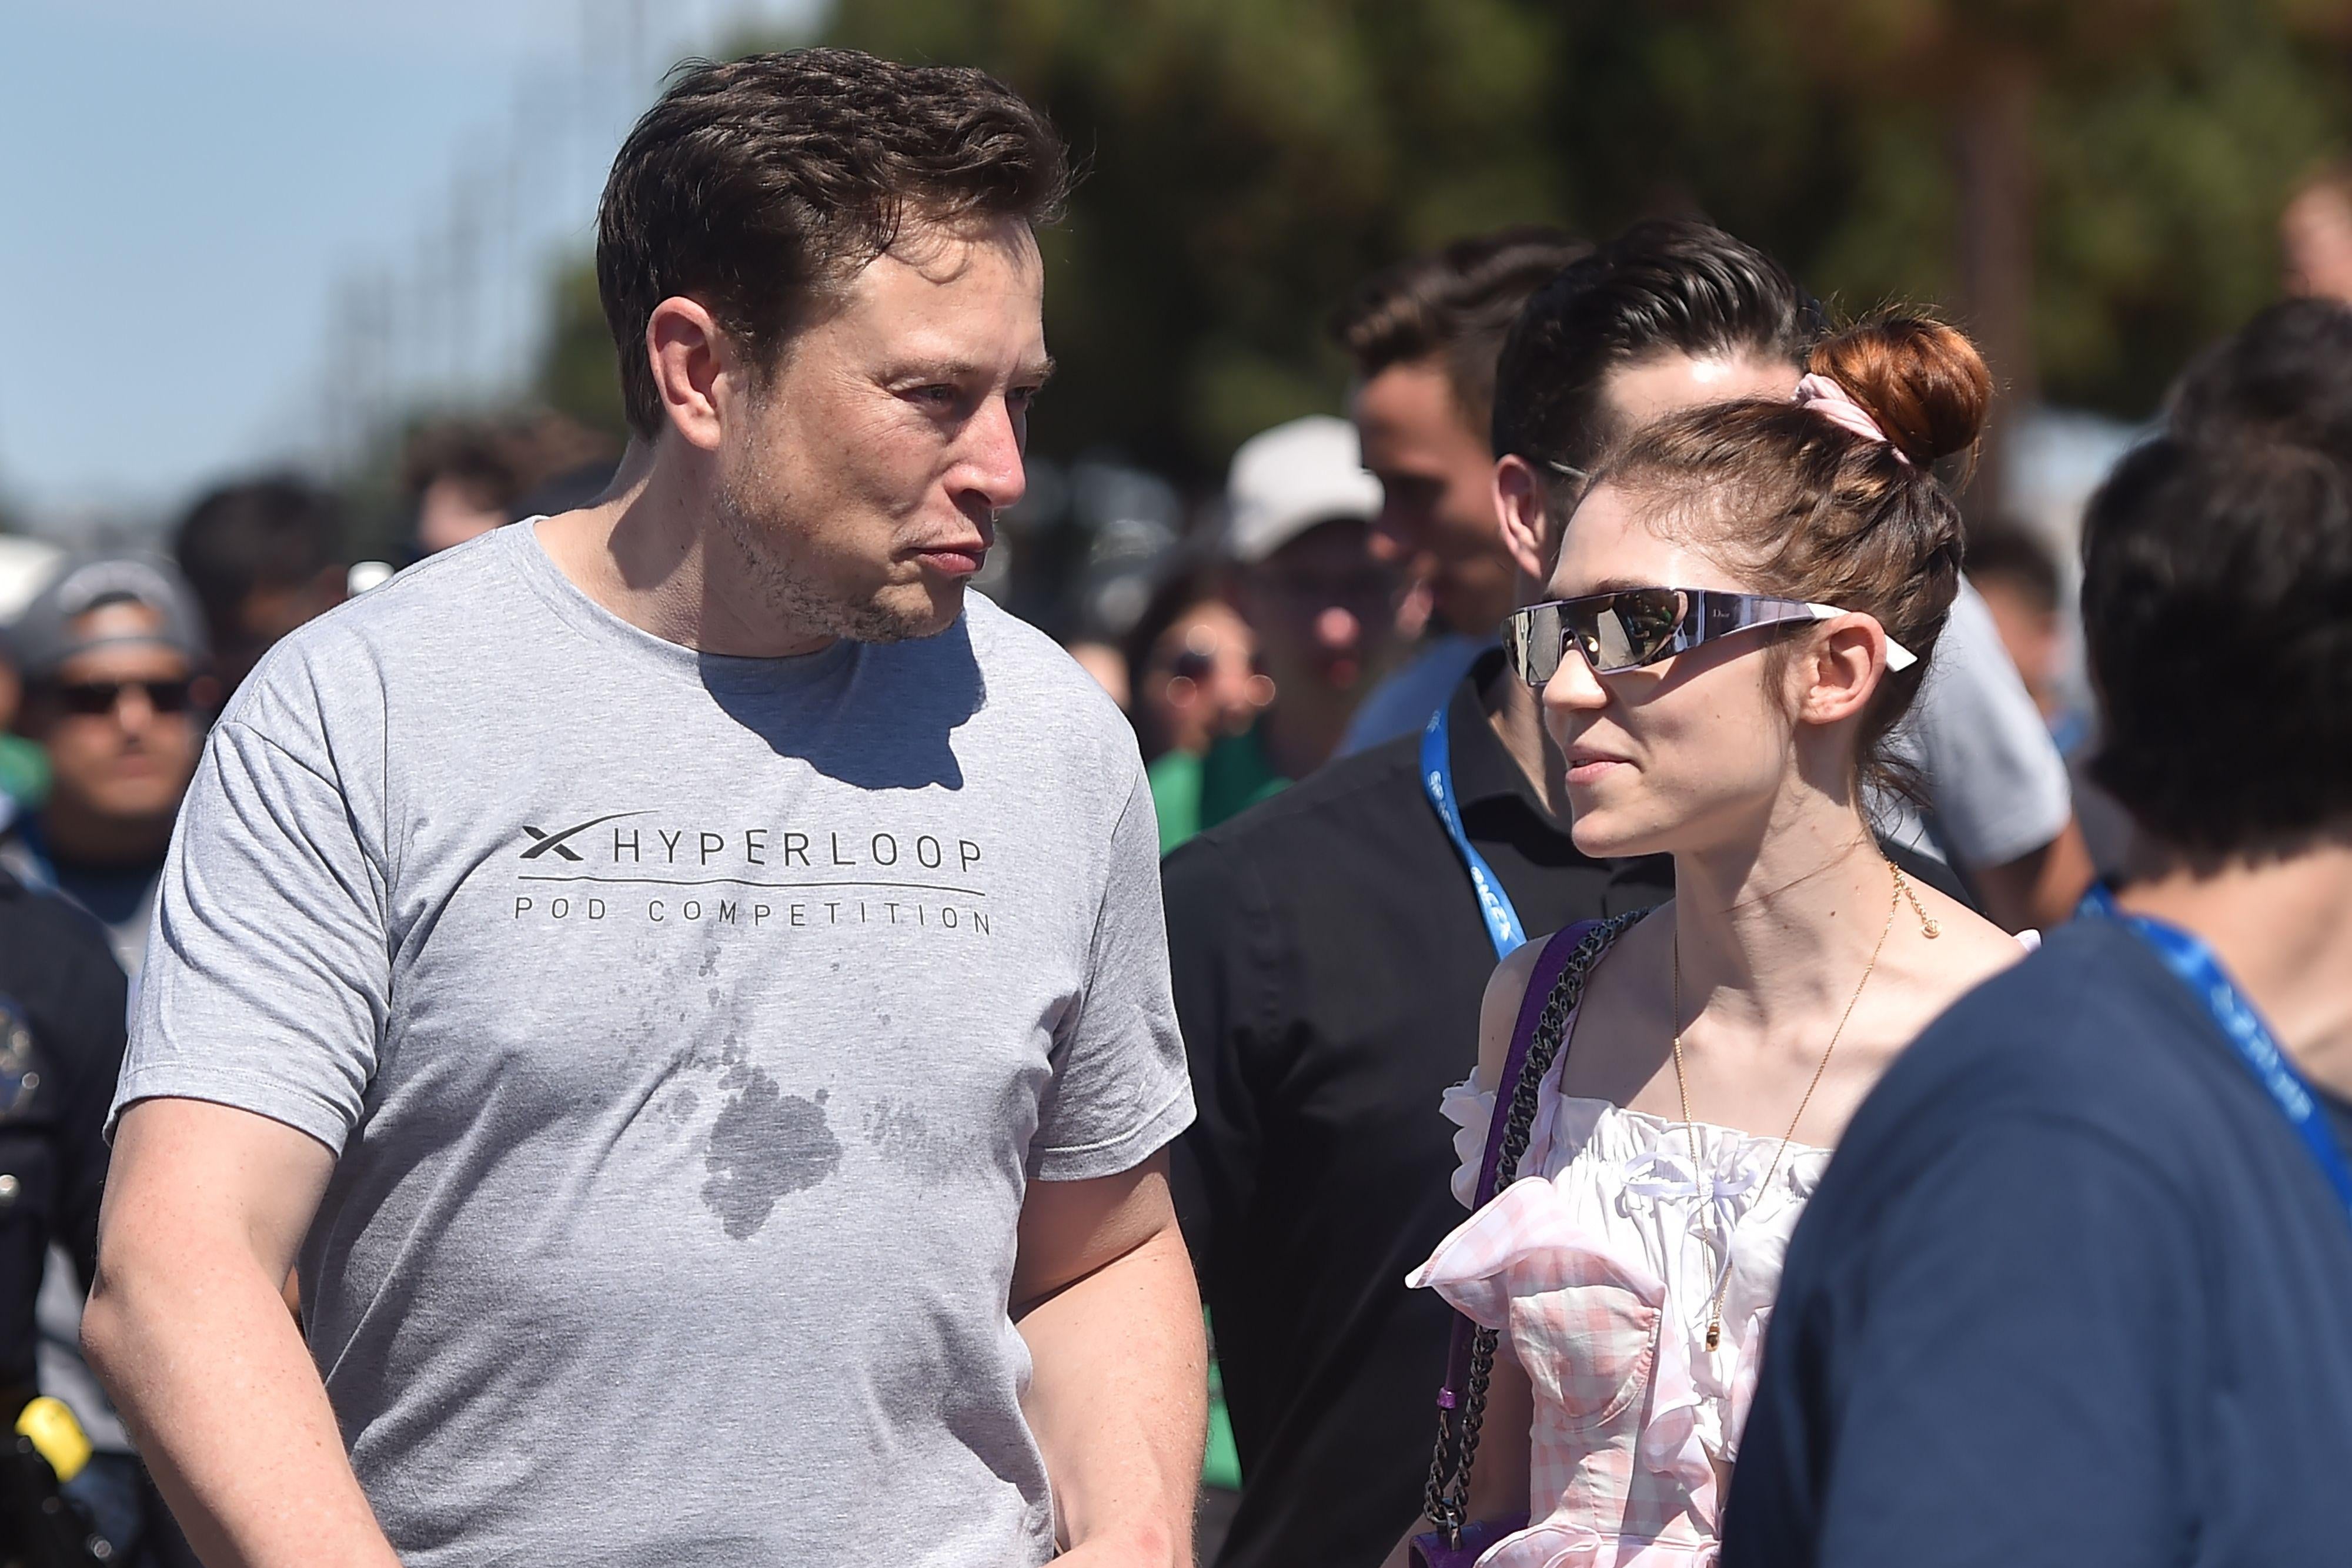 Musk in a Hyperloop T-shirt and Grimes wearing futuristic metal sunglasses and a dress walk next to each other in a crowd outside